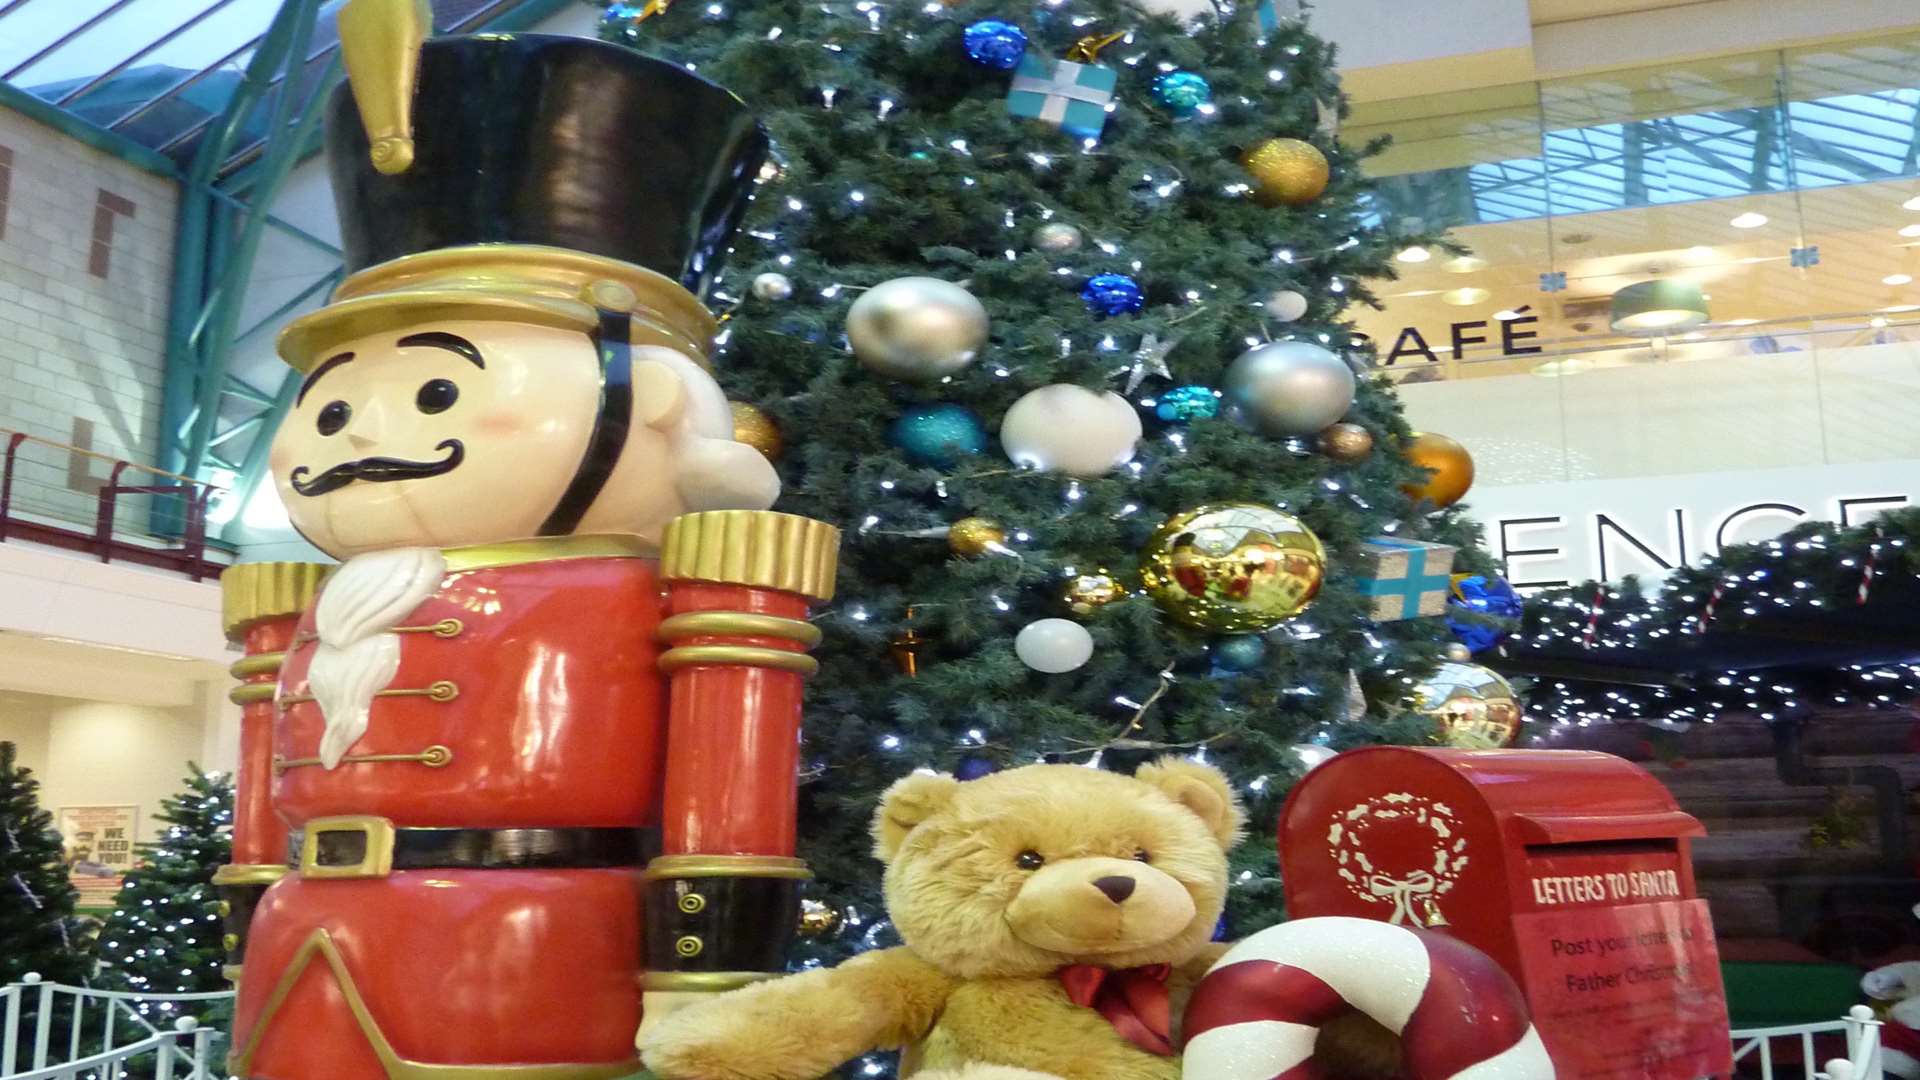 Christmas at Hempstead Valley shopping centre